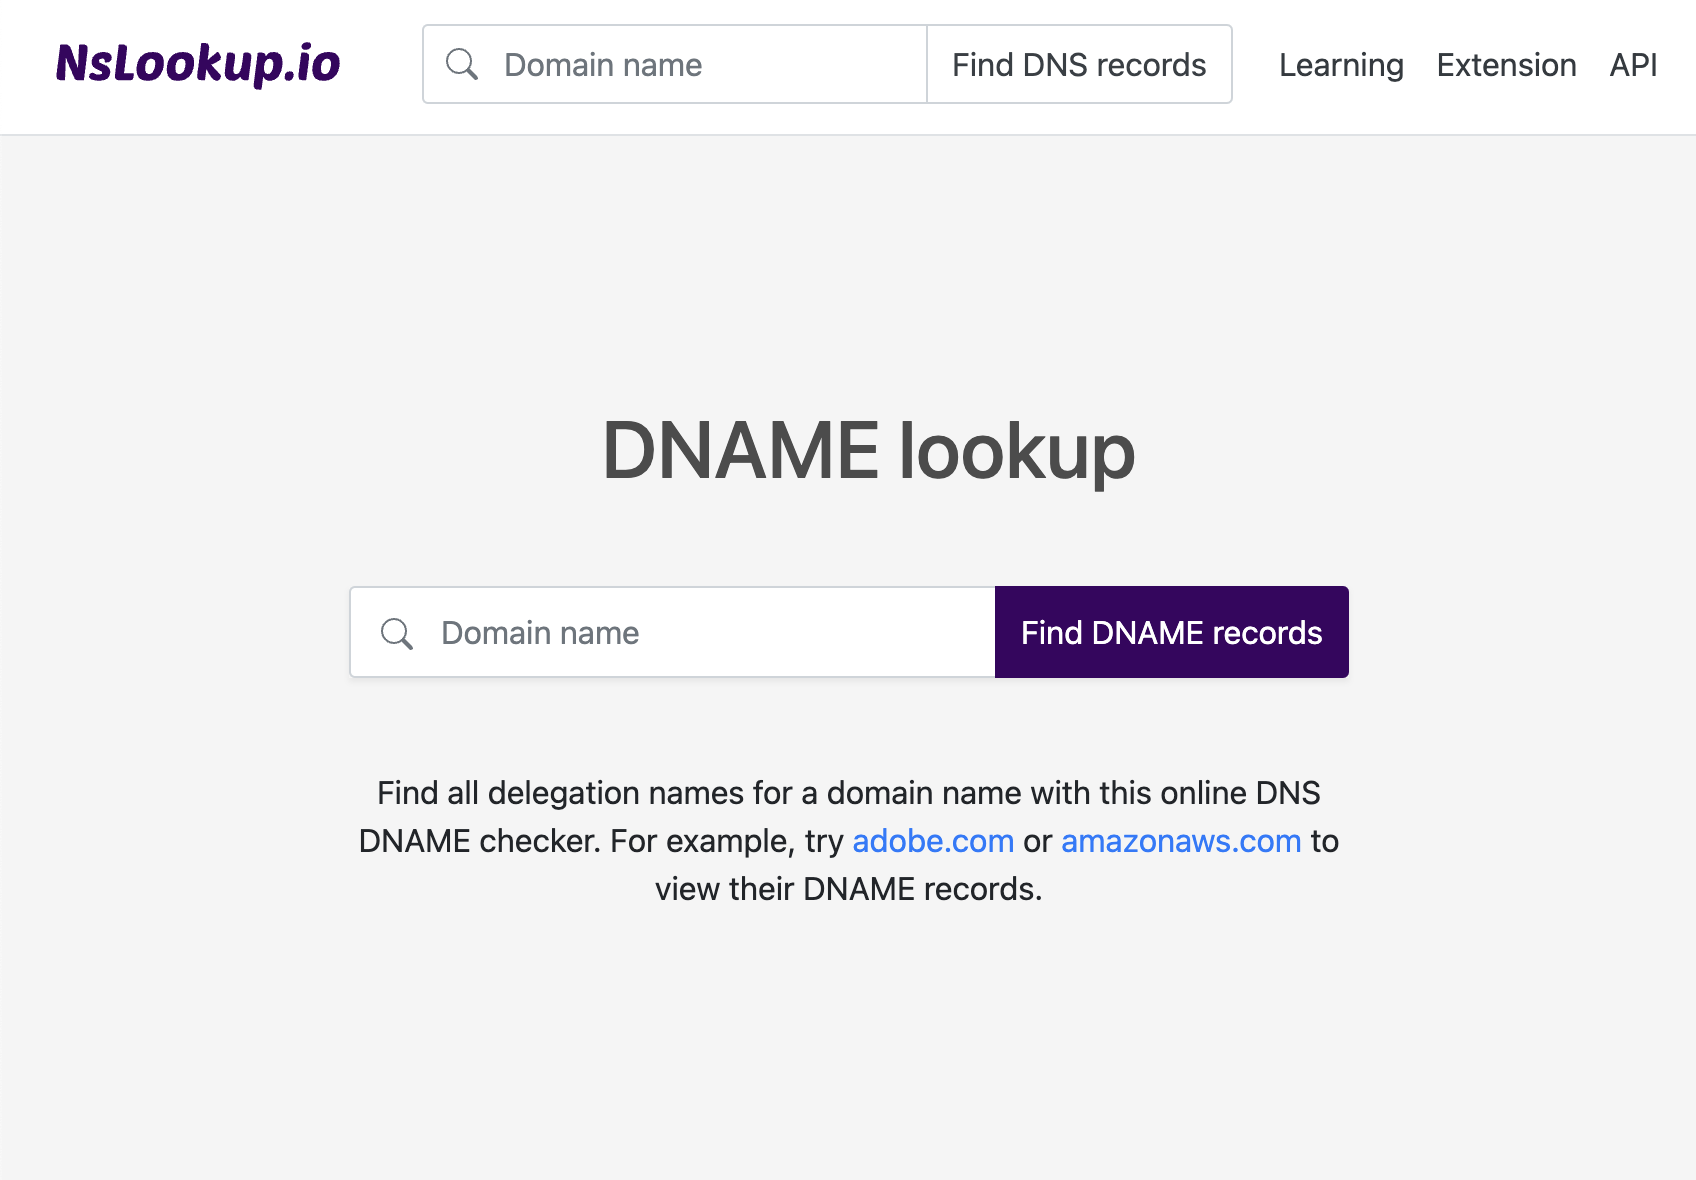 Open the DNAME lookup tool